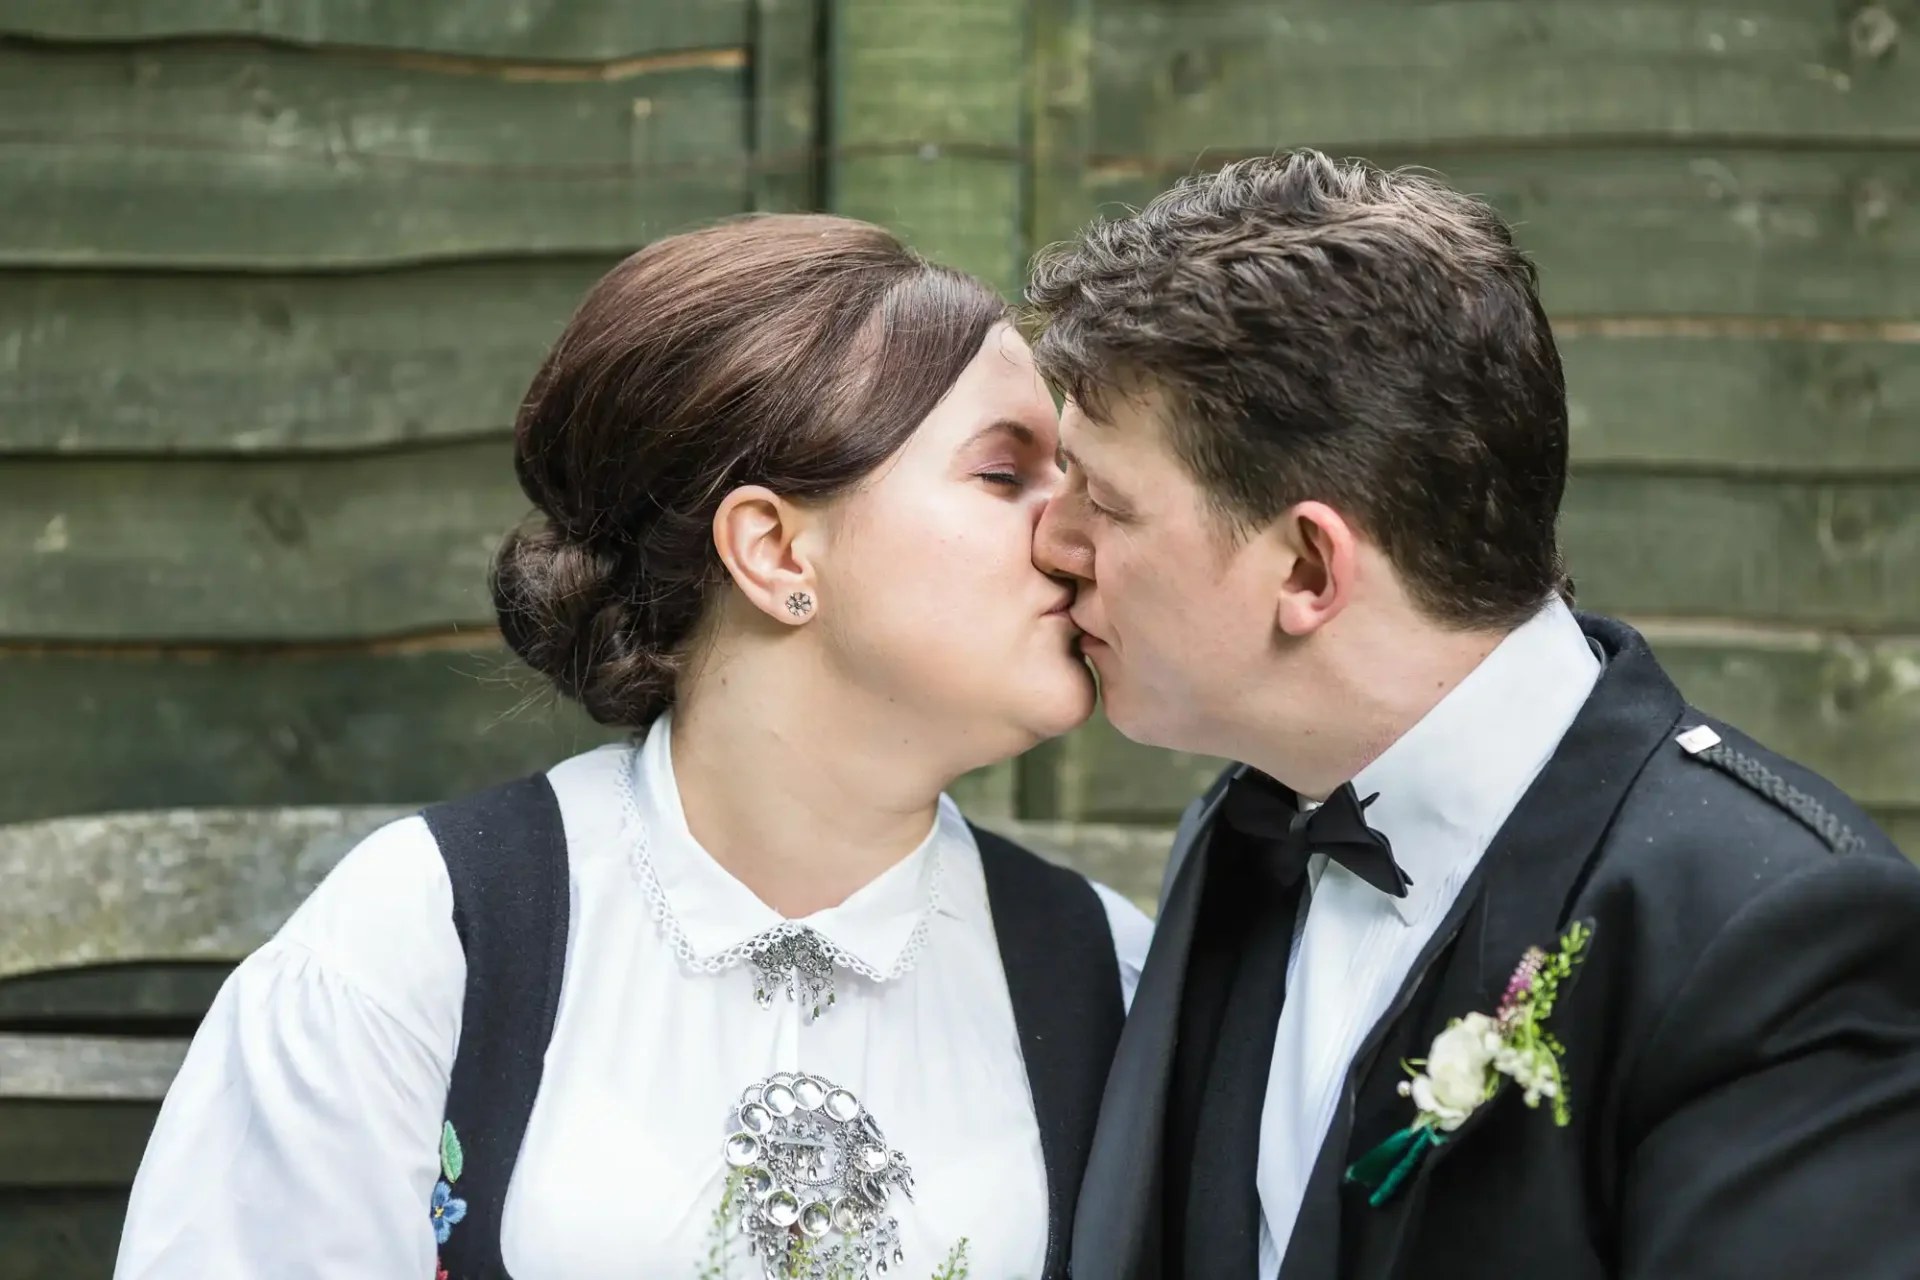 A couple in traditional attire kissing gently, with a wooden fence and greenery in the background.